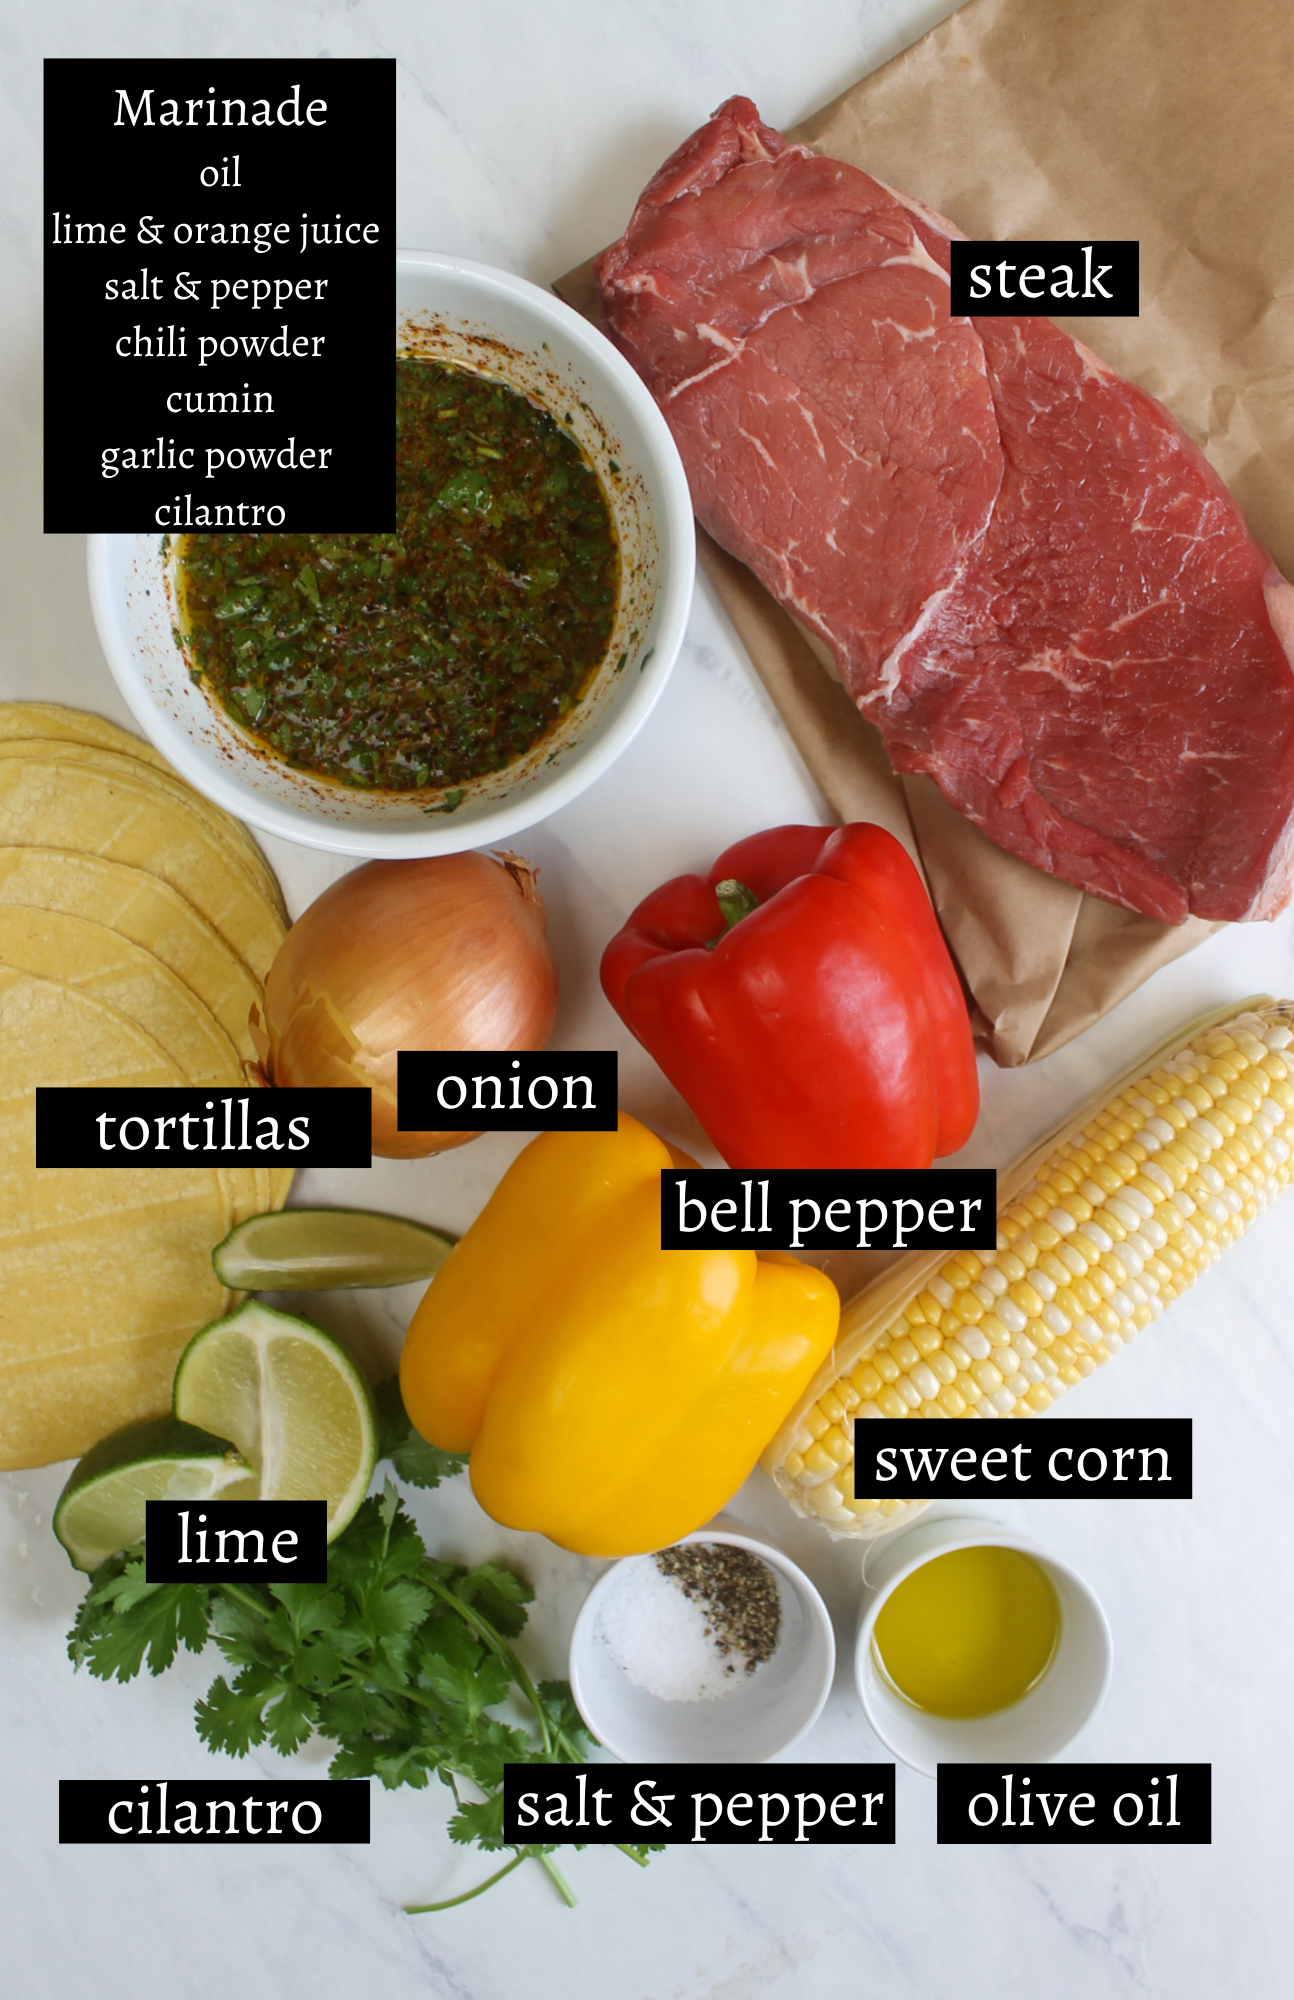 Labeled ingredients for steak fajita tacos with pepper, onions and corn.